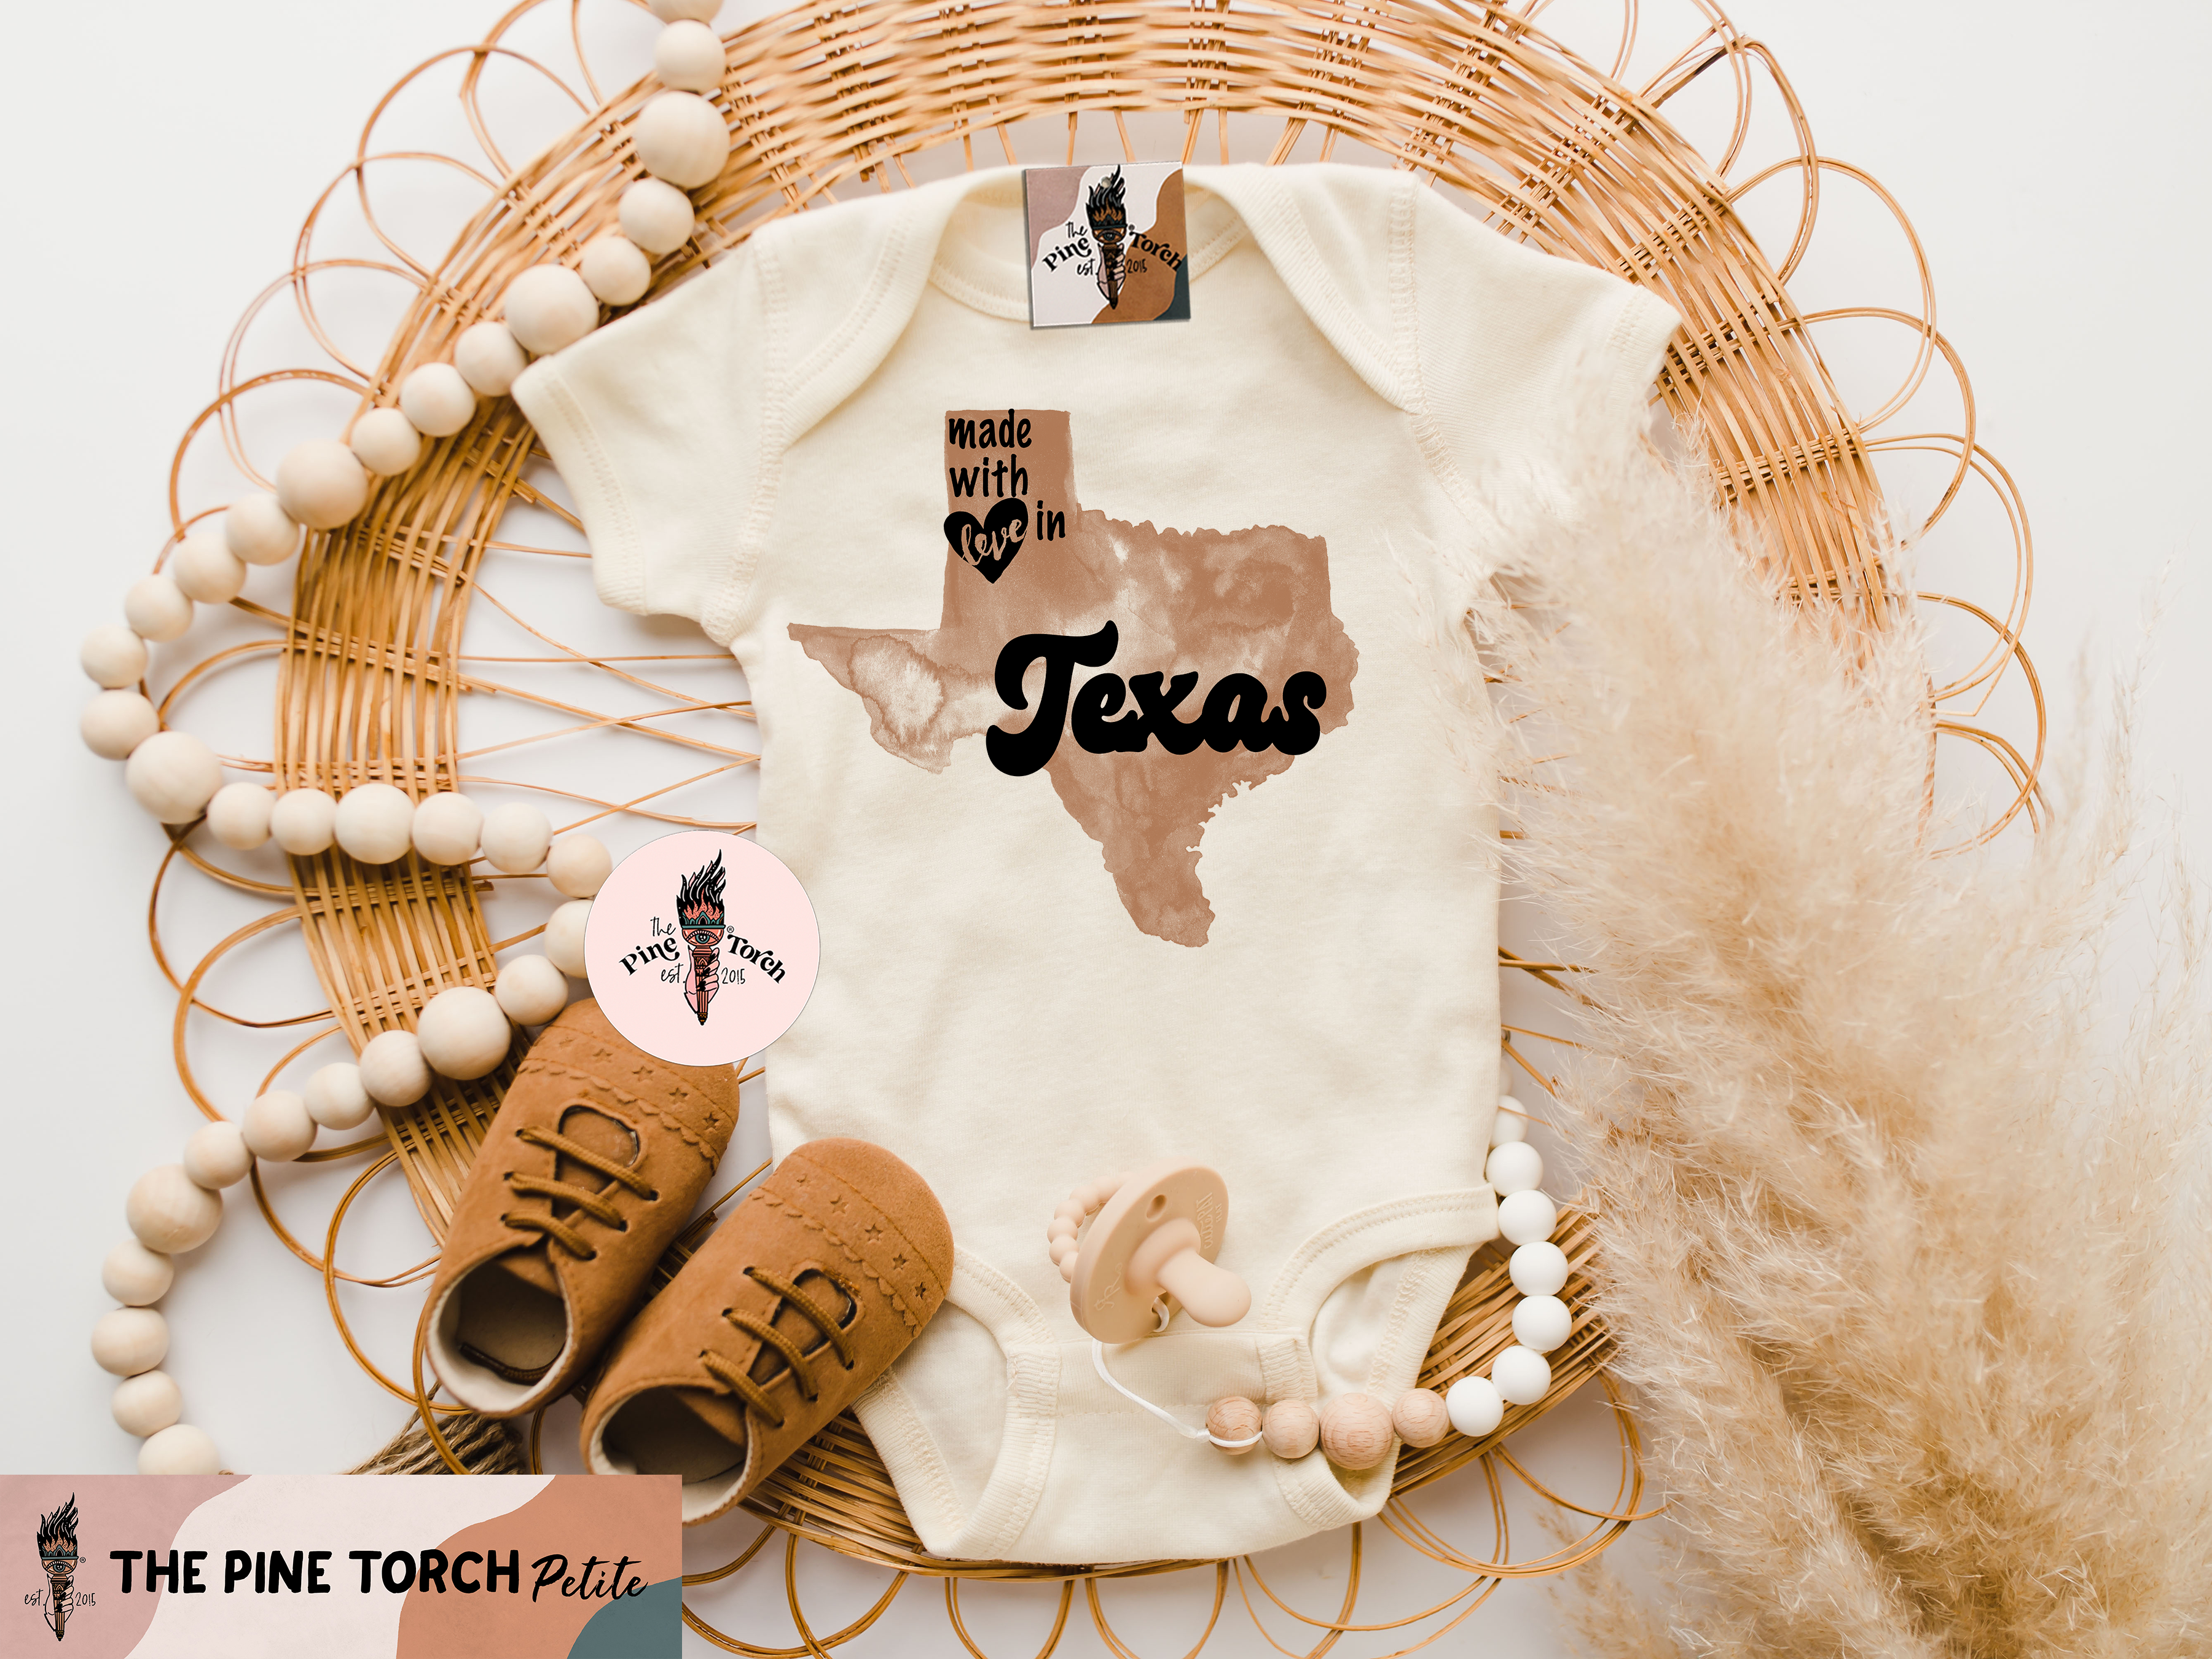 « MADE WITH LOVE IN TEXAS » BODYSUIT